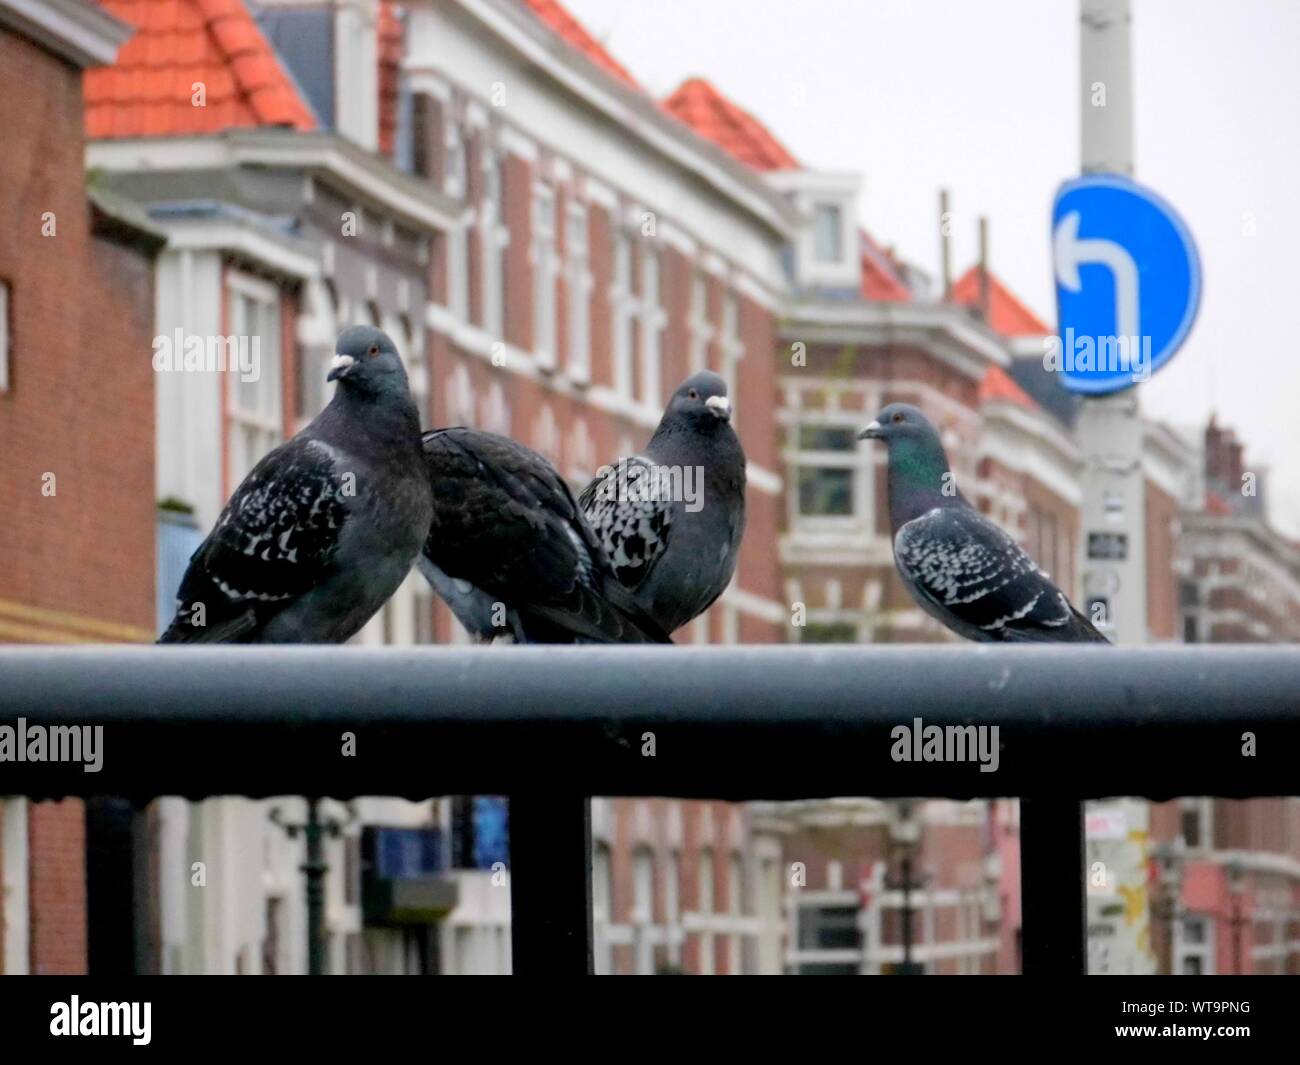 Four Pigeon Siting On Railings Stock Photo